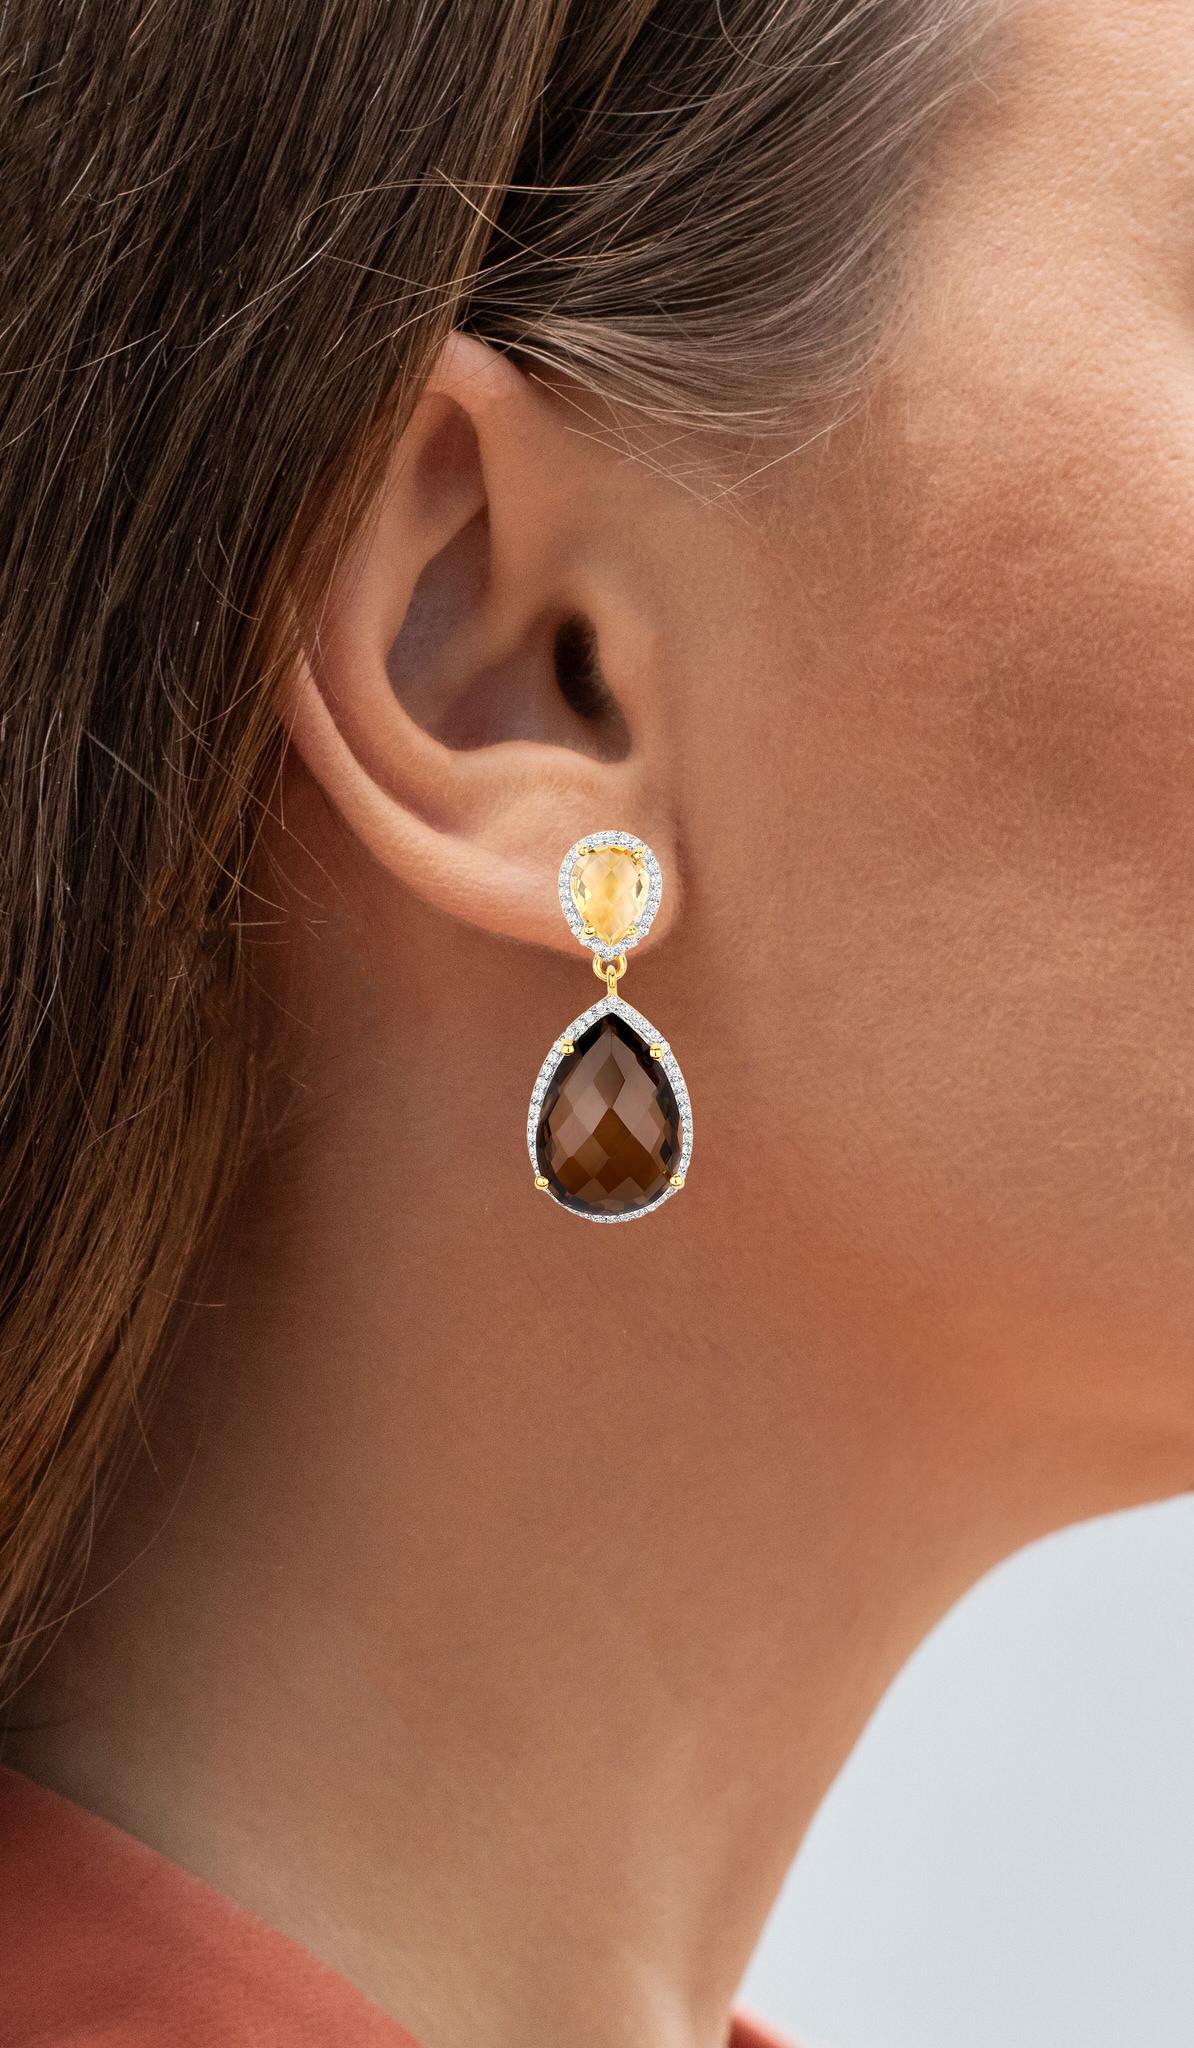 It comes with the Gemological Appraisal by GIA GG/AJP
All Gemstones are Natural
2 Smoky Quartz = 18.00 Carats
2 Citrines = 2.50 Carats
132 White Topazes = 0.66 Carats
Metal: 18K Yellow Gold Plated Sterling Silver
Dimensions: 35 x 15 mm
